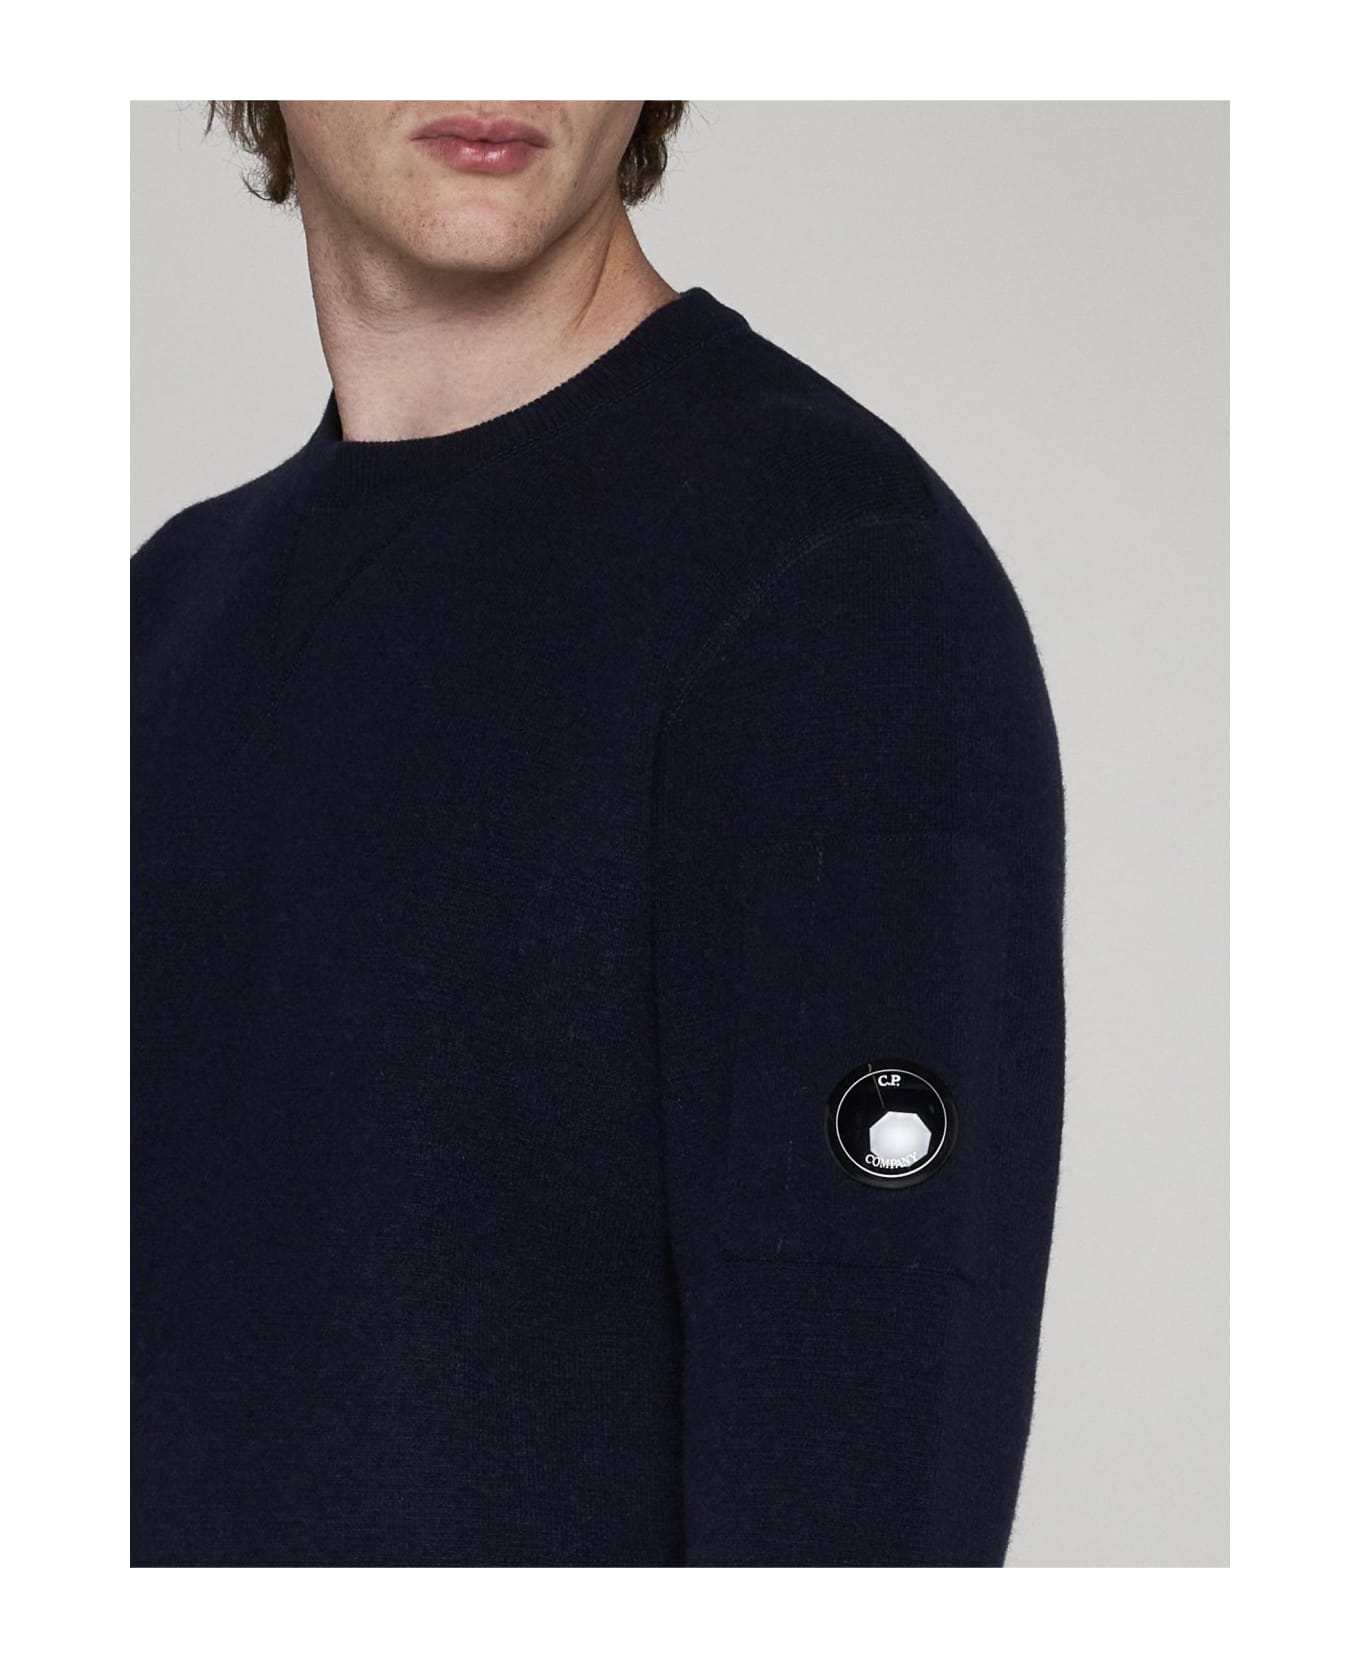 C.P. Company Lambswool Sweater - Total eclipse